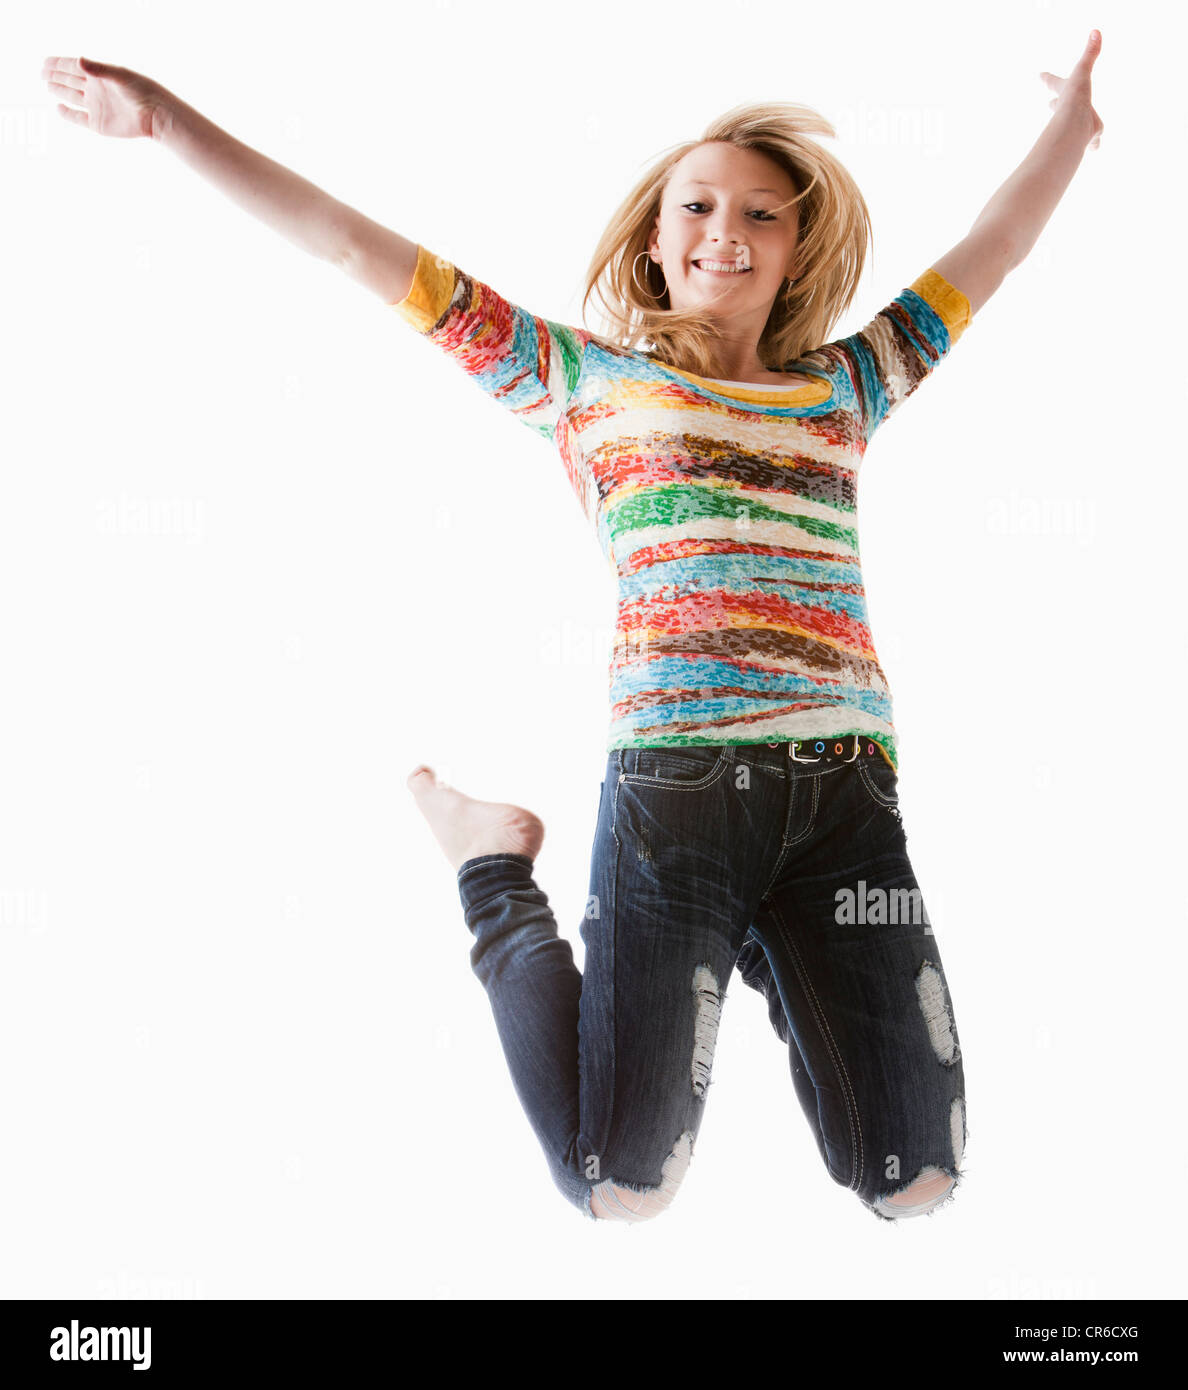 Portrait of Girl (12-13) jumping with arms raised Banque D'Images